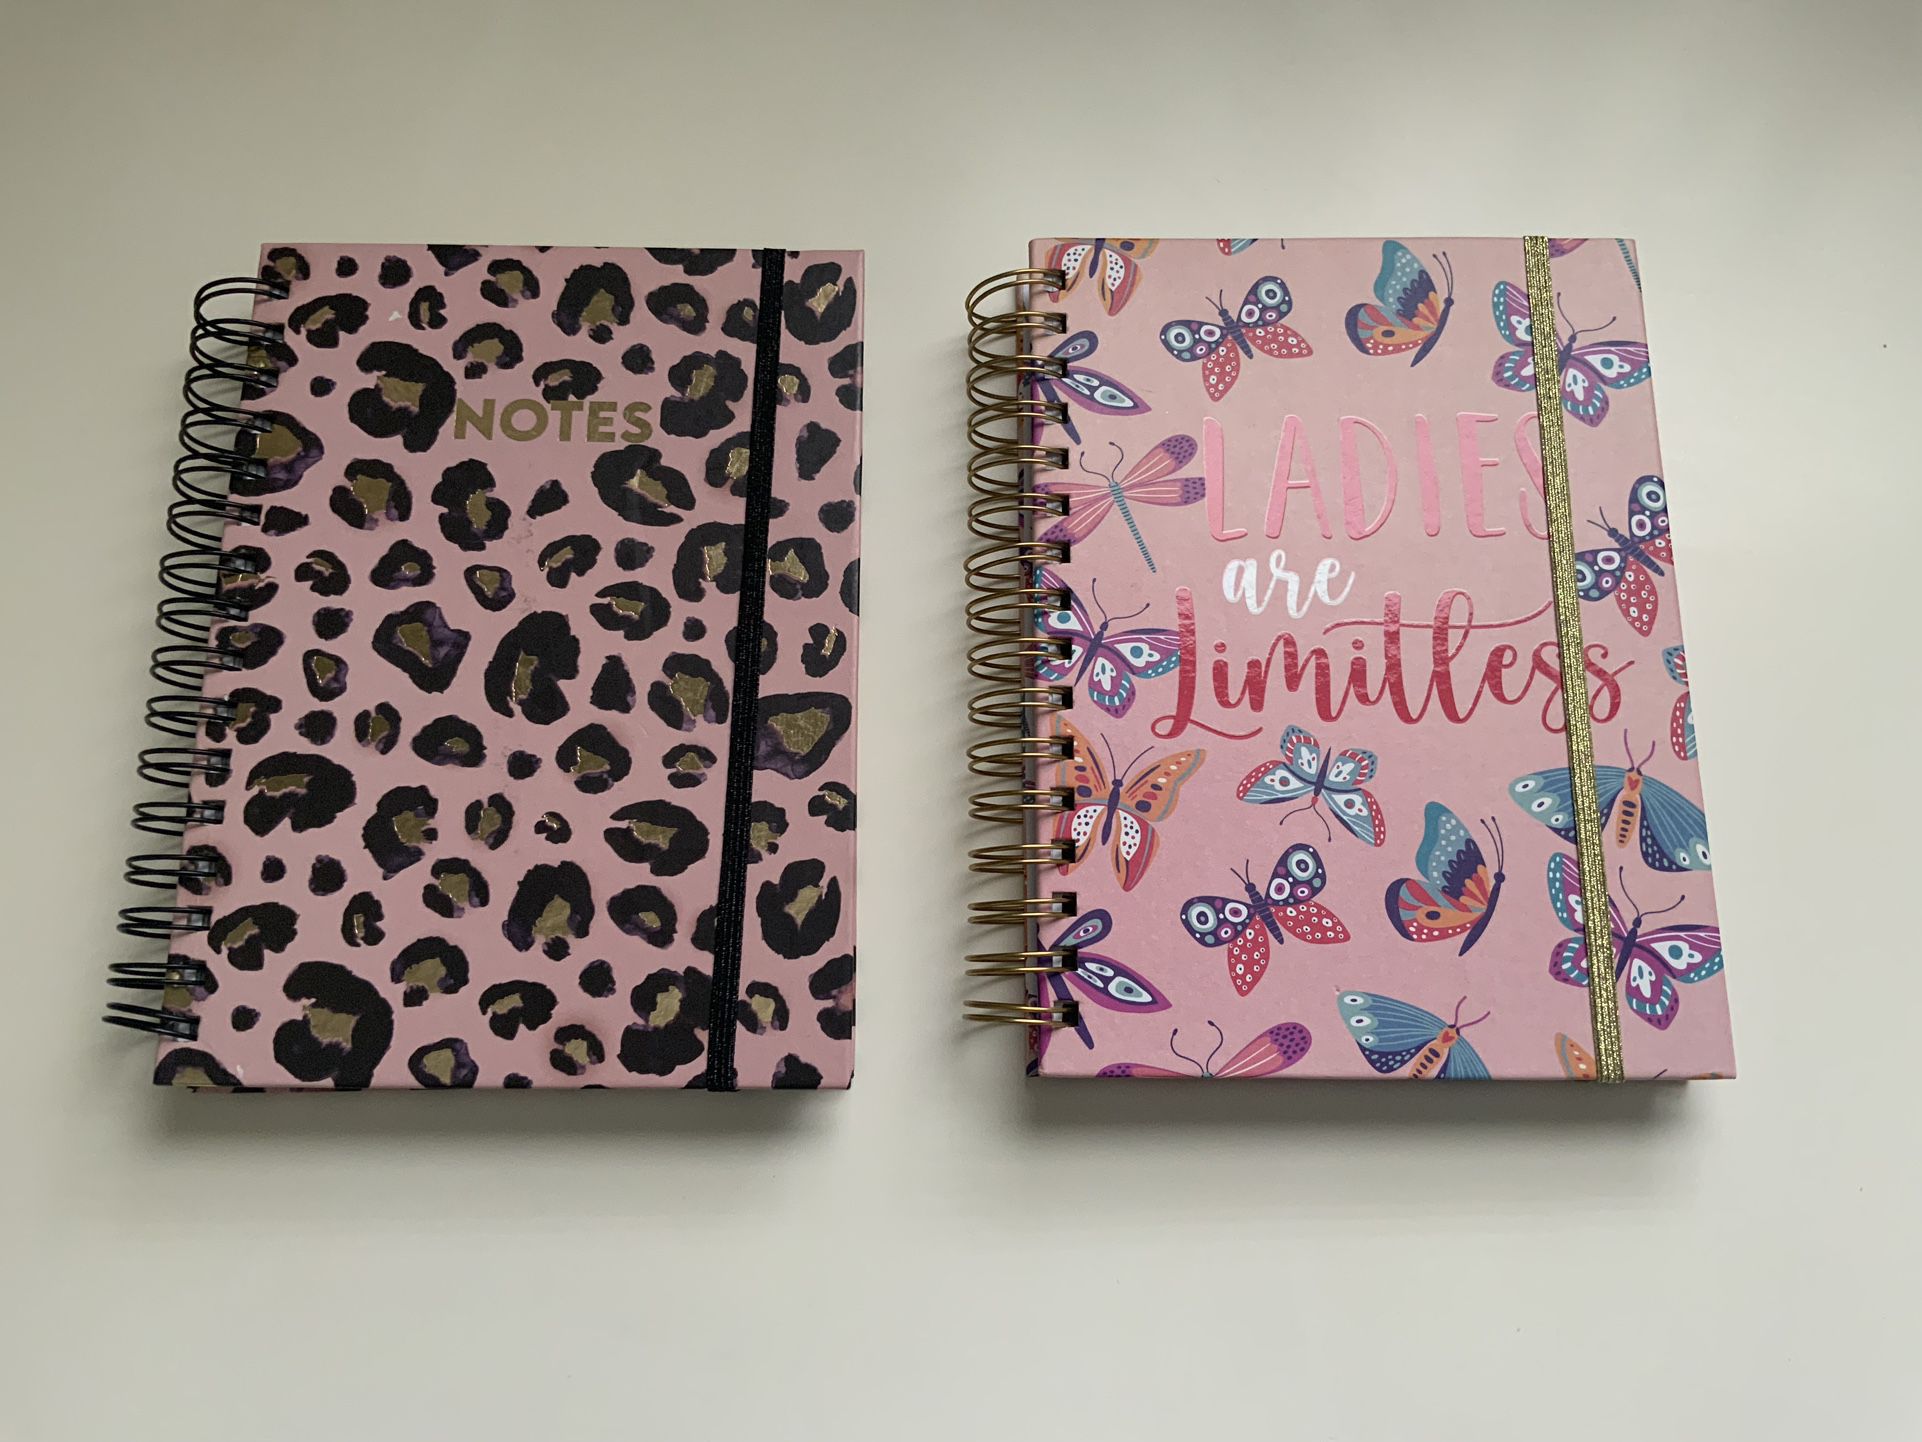 Paper Tales Book Notebooks 2pc) Spiral Planners 6"x8, Butterfly & Leopard Design